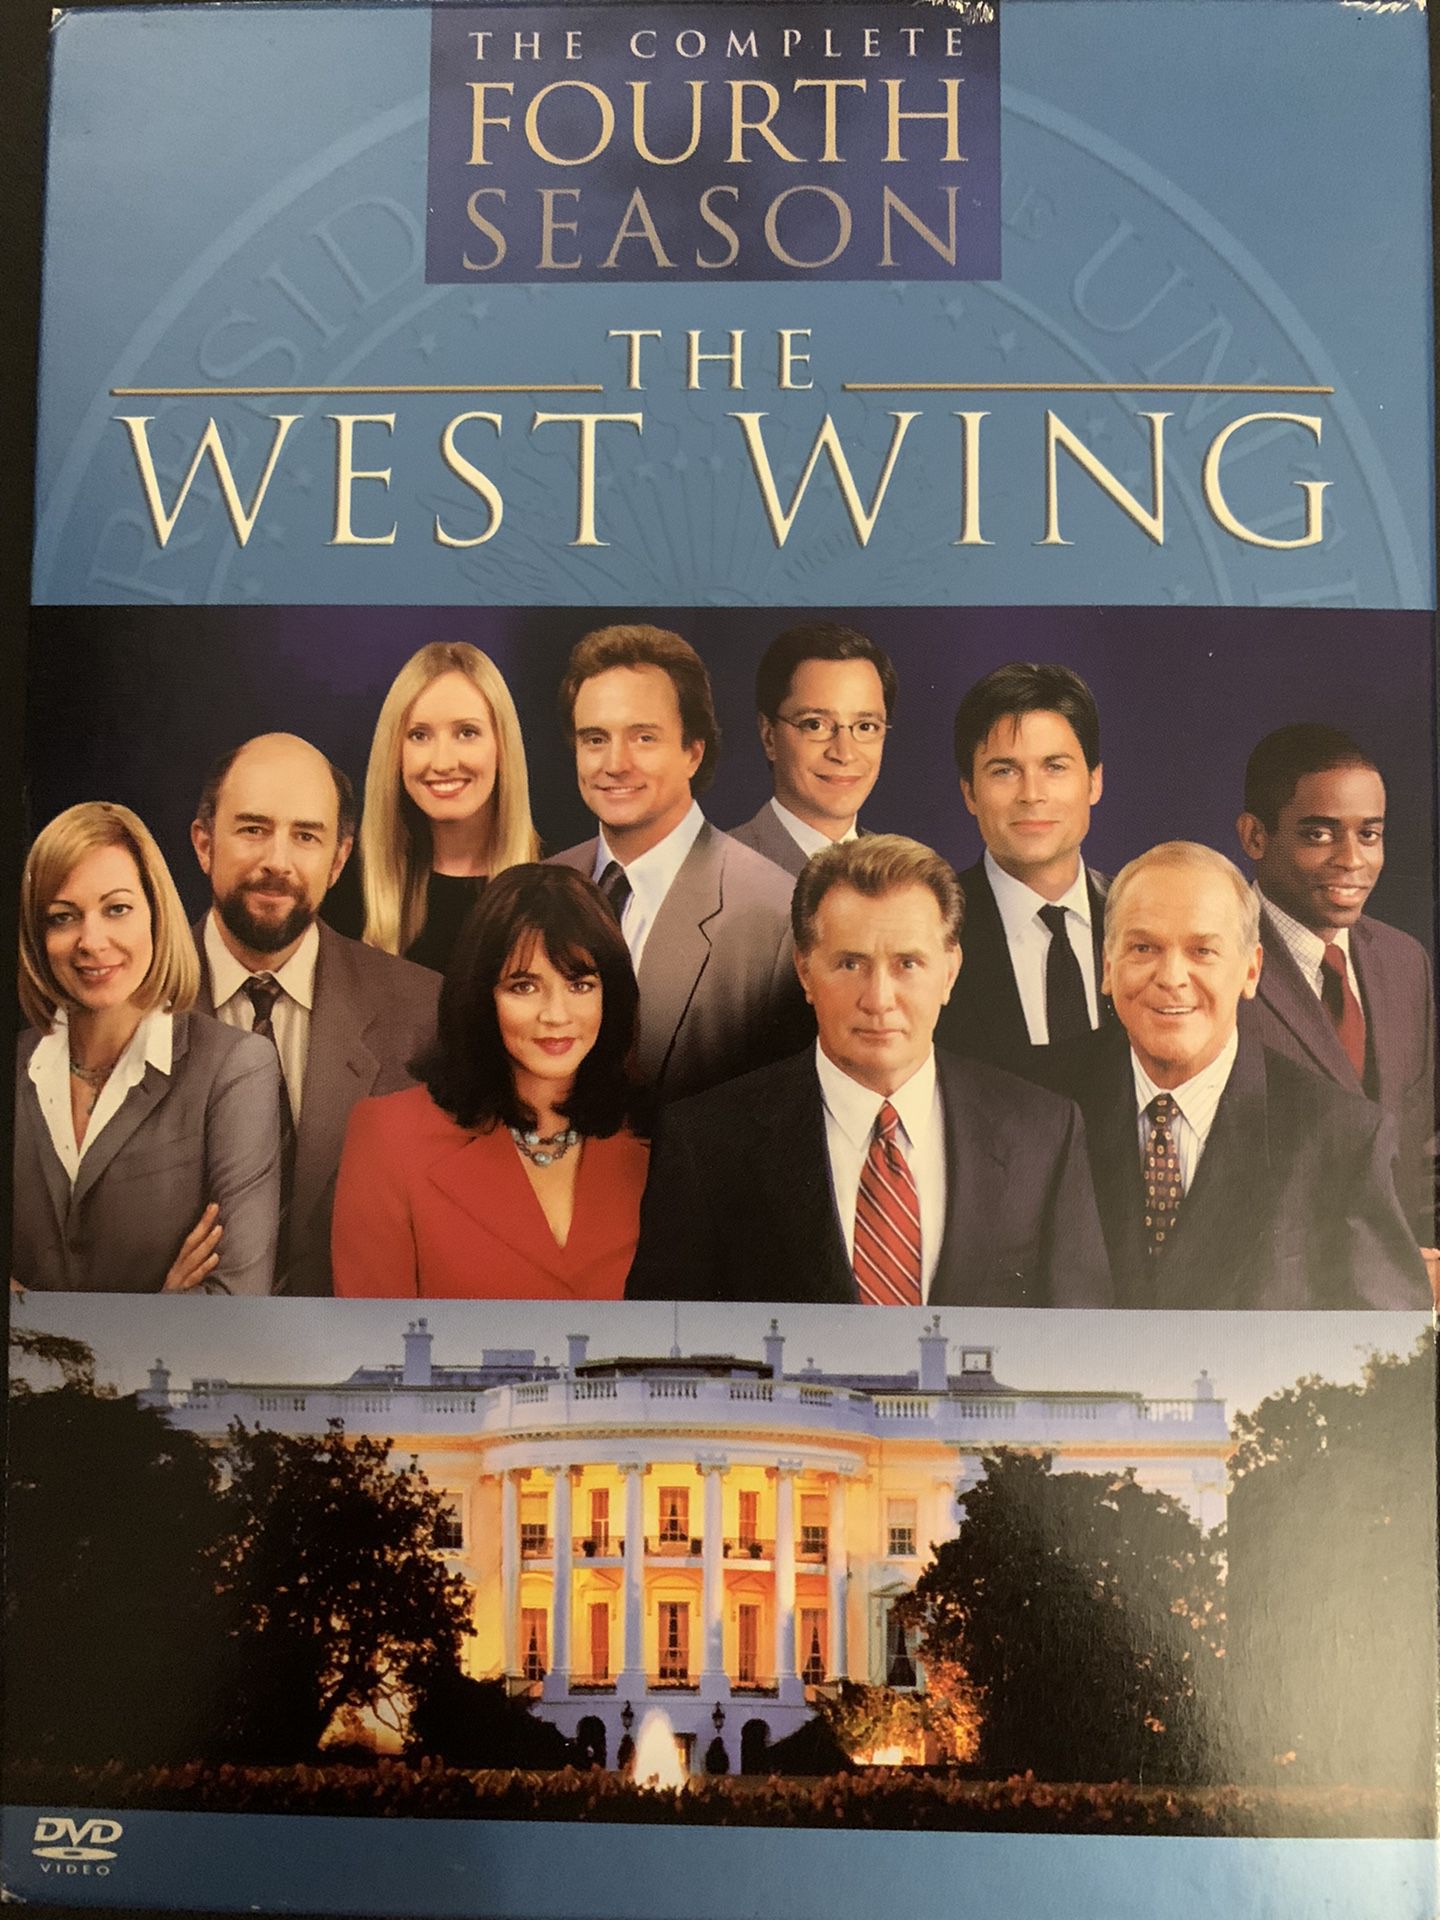 The WEST WING The Complete 4th Season (DVD)